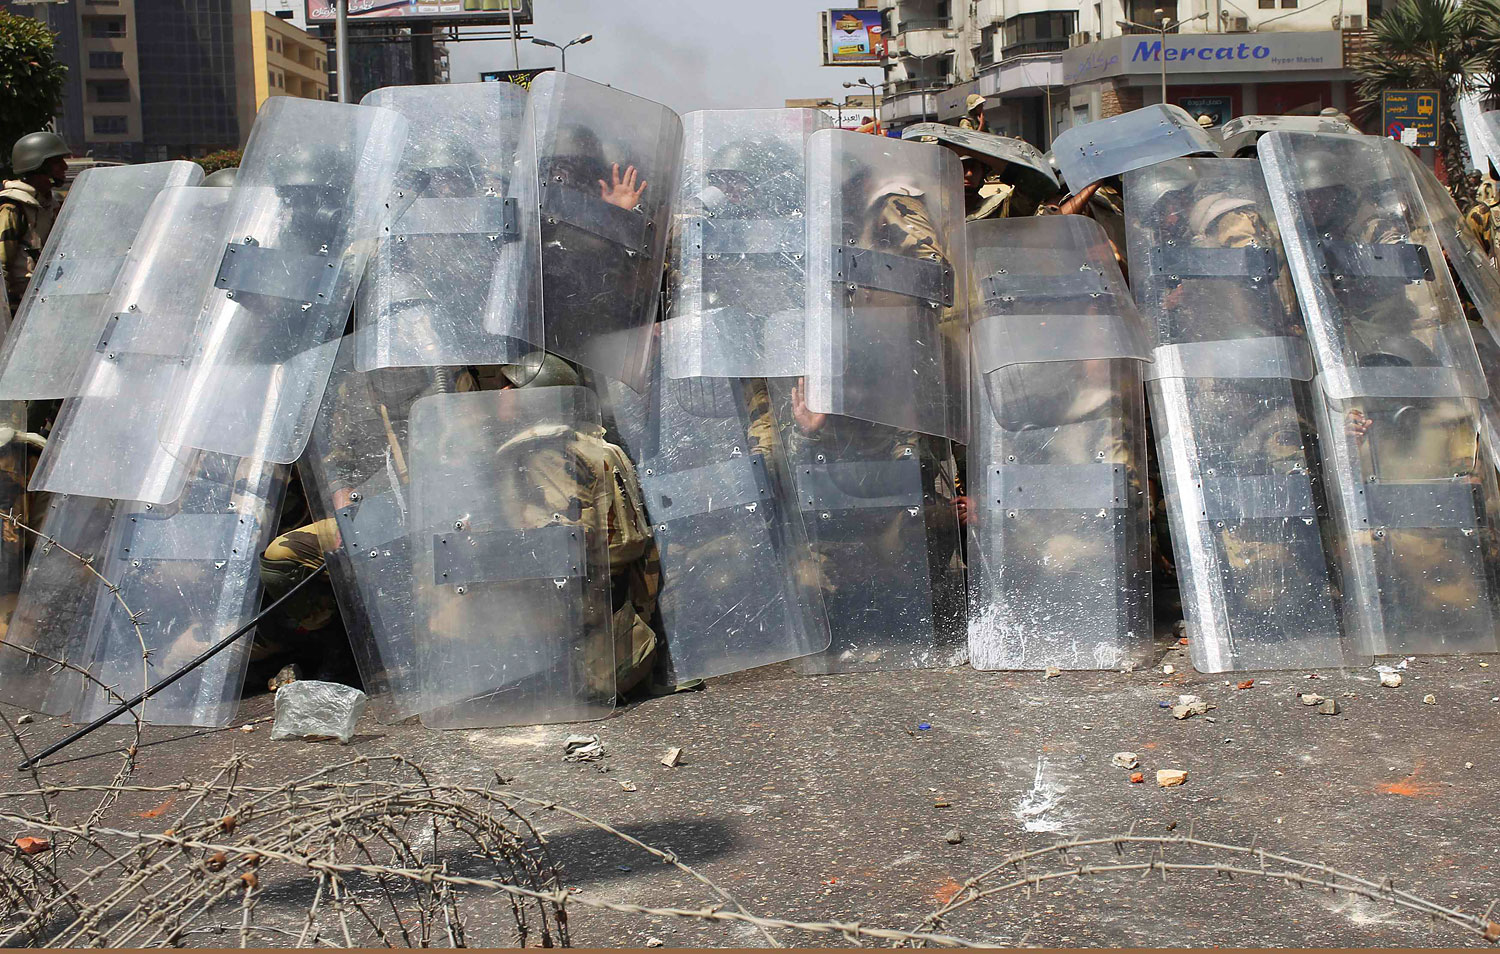 Riot police and army soldiers protect themselves with riot shields as members of the Muslim Brotherhood and supporters of ousted Egyptian President Mohamed Mursi throw stones during clashes around the area of Rabaa Adawiya square, where they are camping, in Cairo, Aug. 14, 2013.